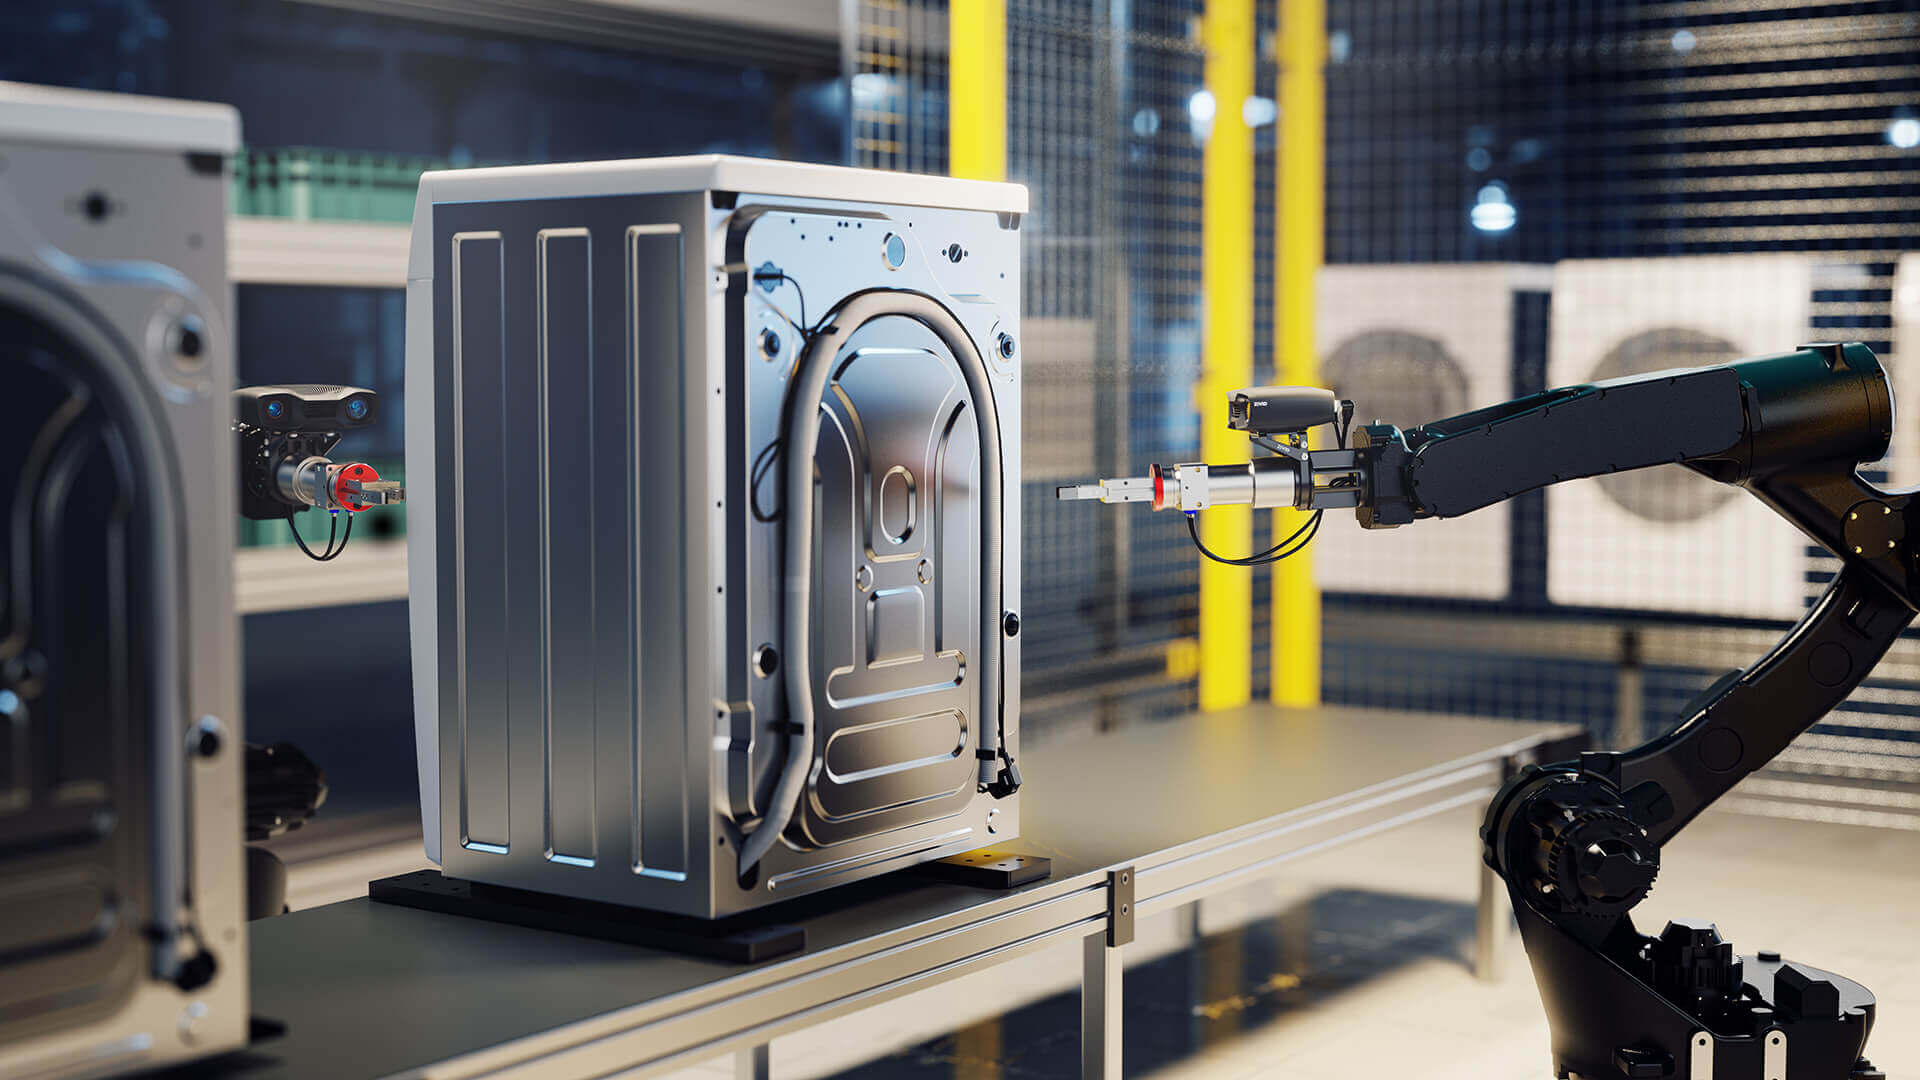 Appliance manufacturing with Zivid 3D vision